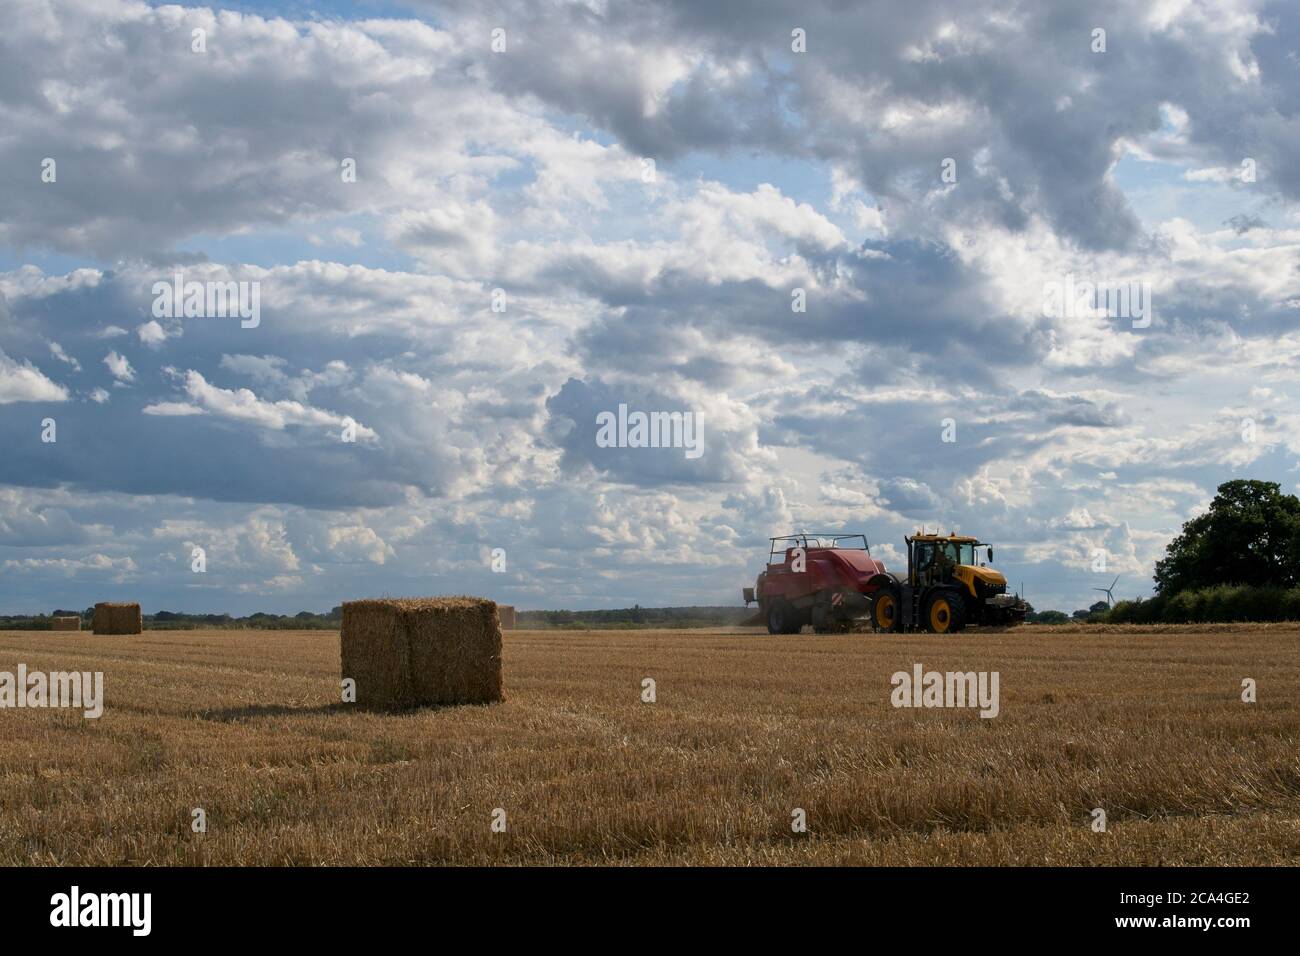 Baling after the harvest  Distant view of tractor towing bailer ejecting bale onto the ground Bales in foreground on stubble Landscape format Stock Photo